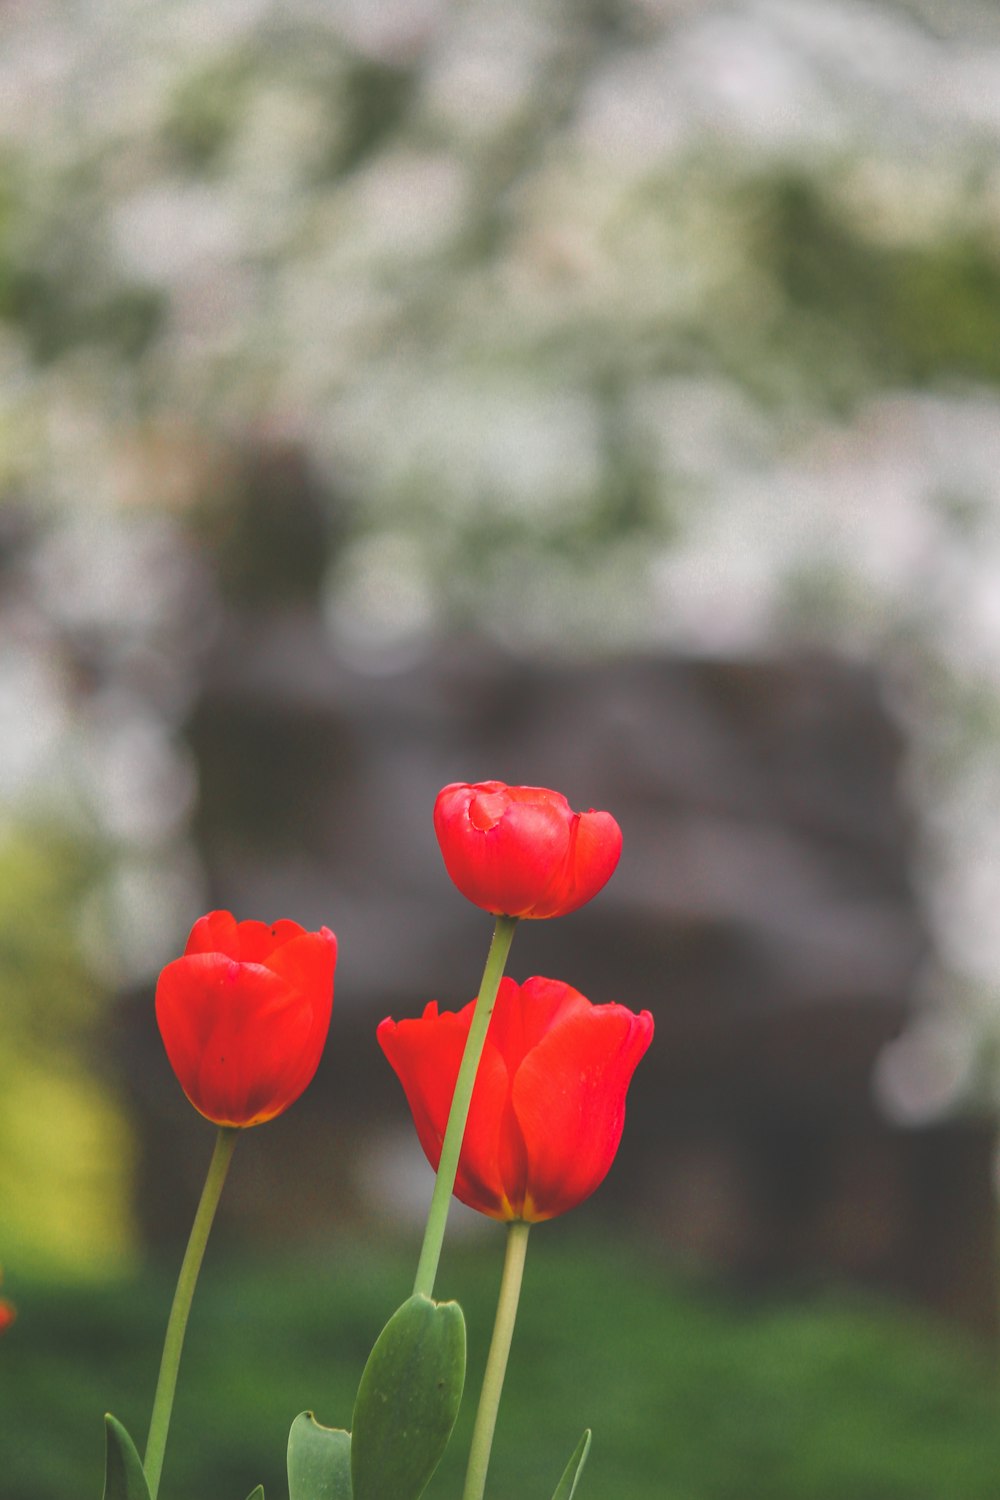 three red tulips in a garden with trees in the background